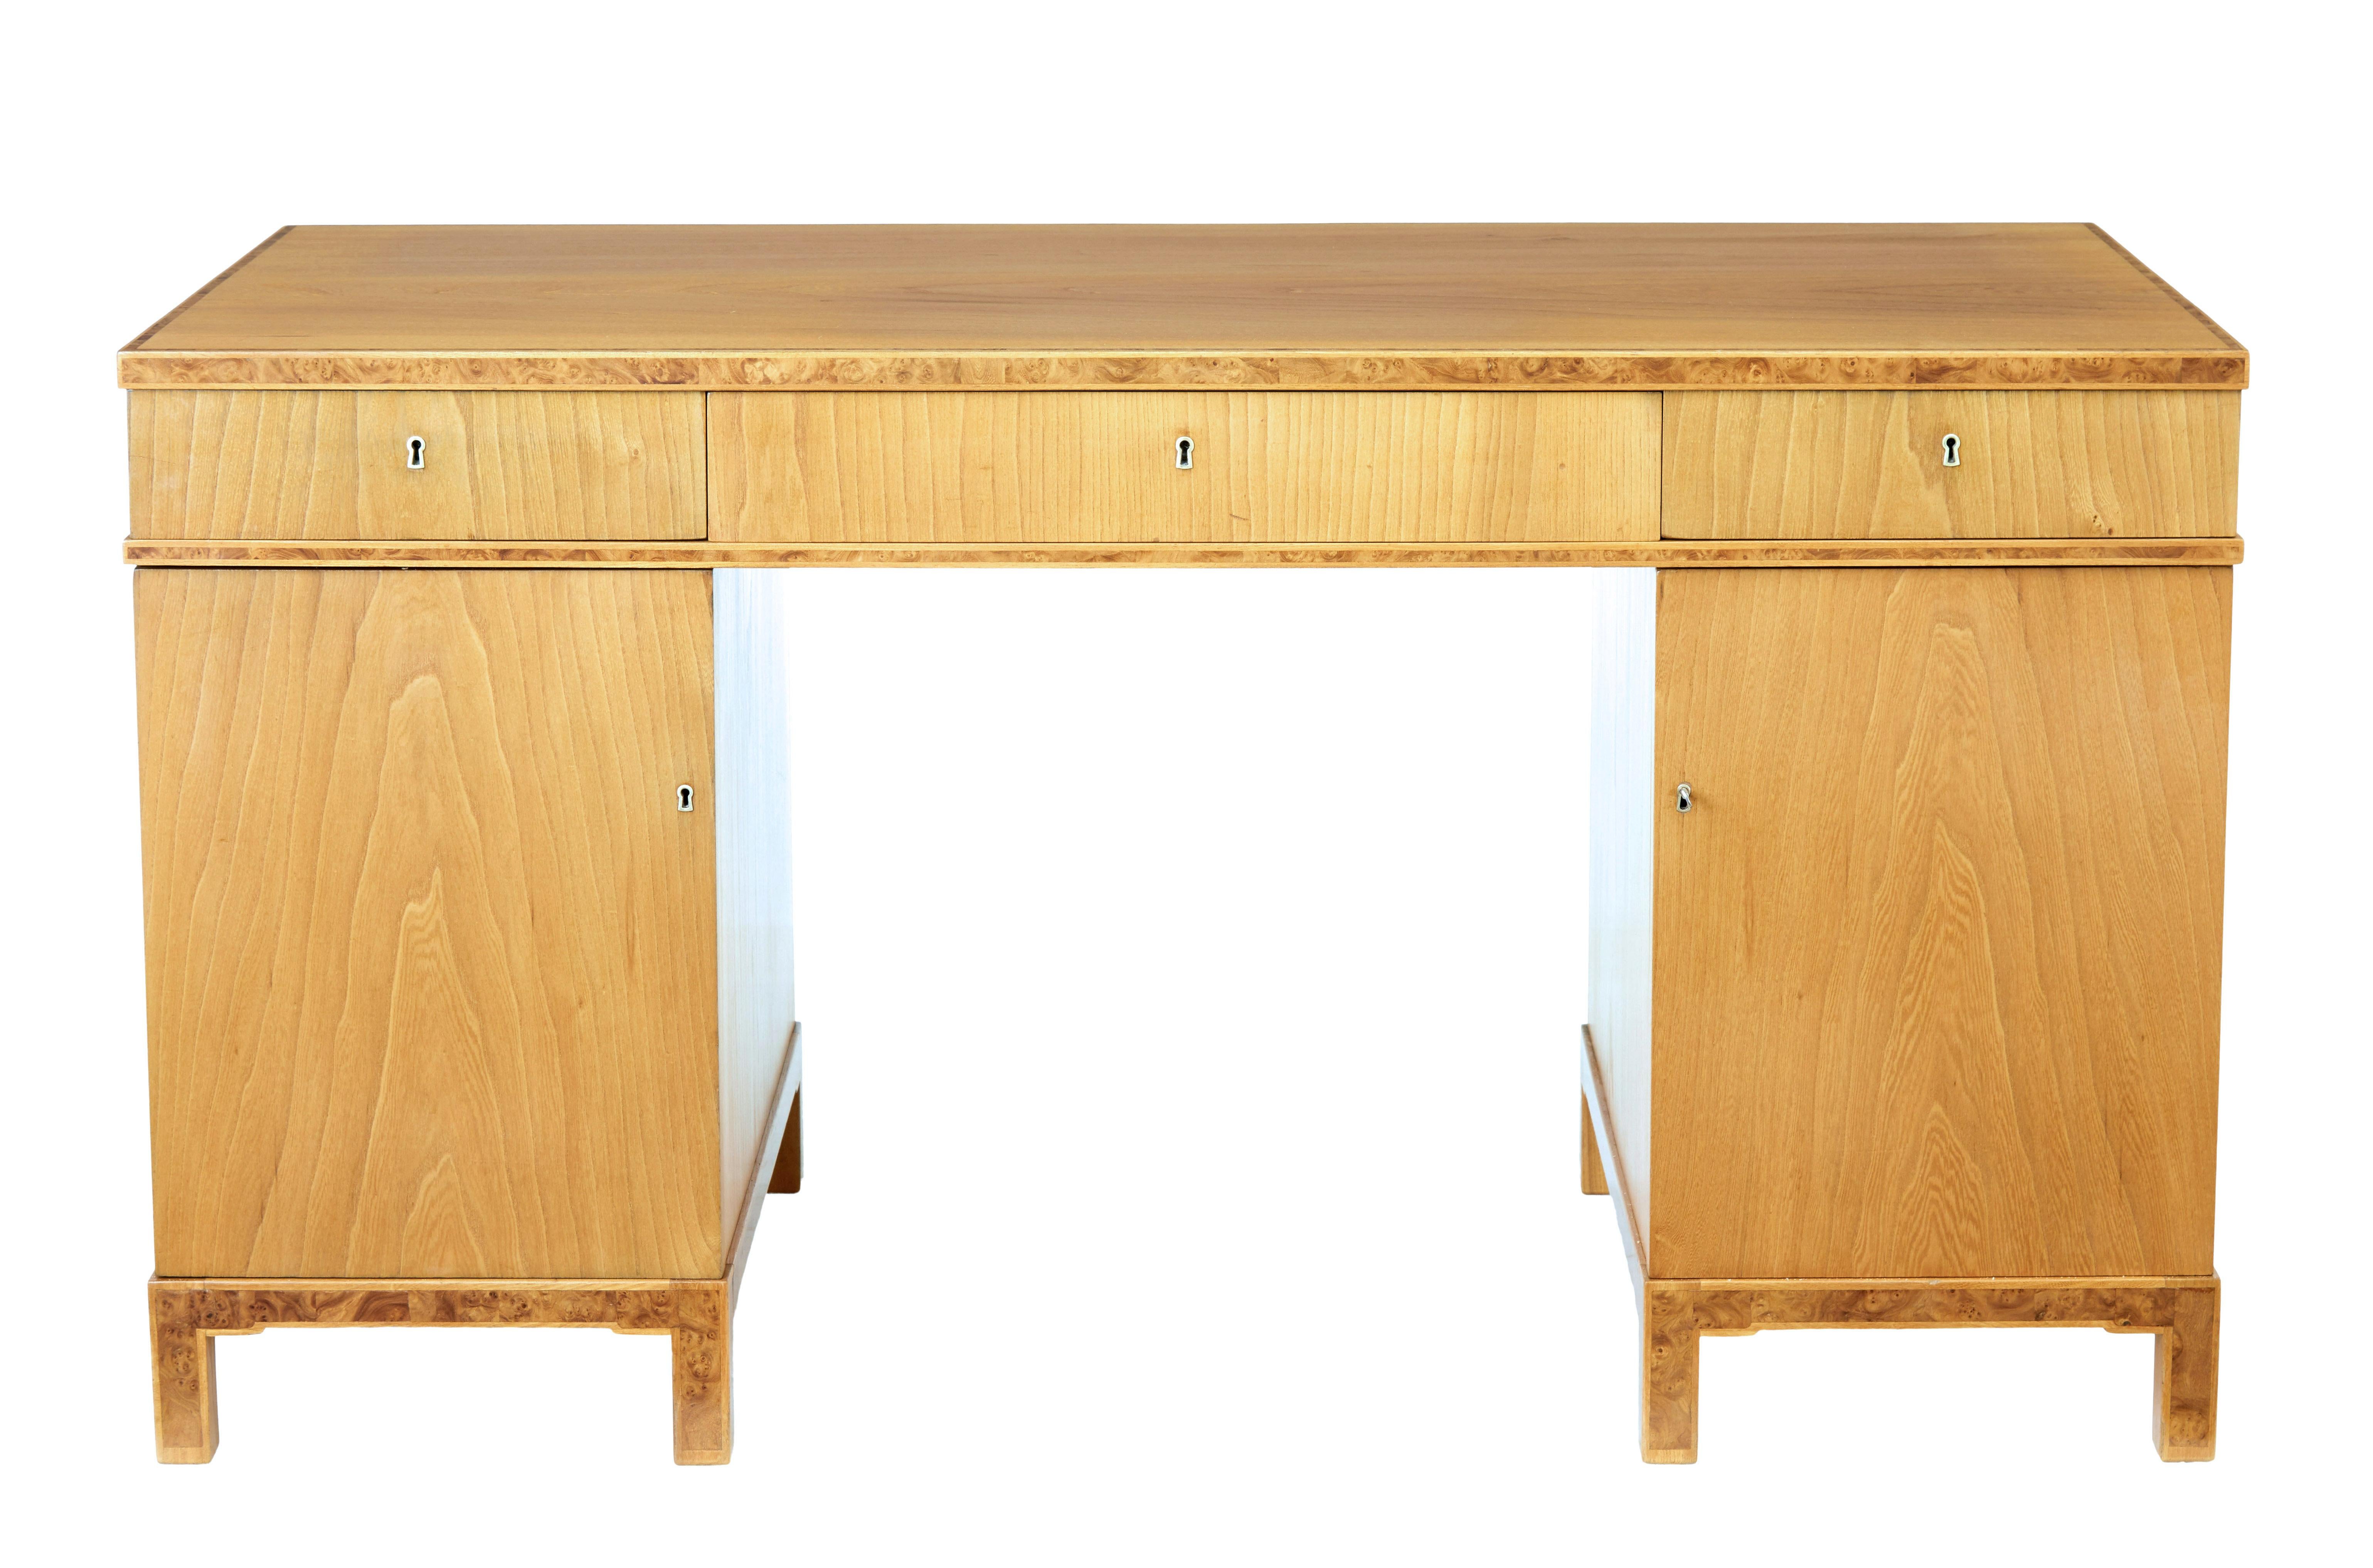 Fine quality mid-20th century Scandinavian elm pedestal desk, circa 1940.

3 part pedestal desk, made from the finest elm veneers.

Writing surface, drawer fronts and legs cross banded with burr detailing. 1 piece veneer to the top surface, with